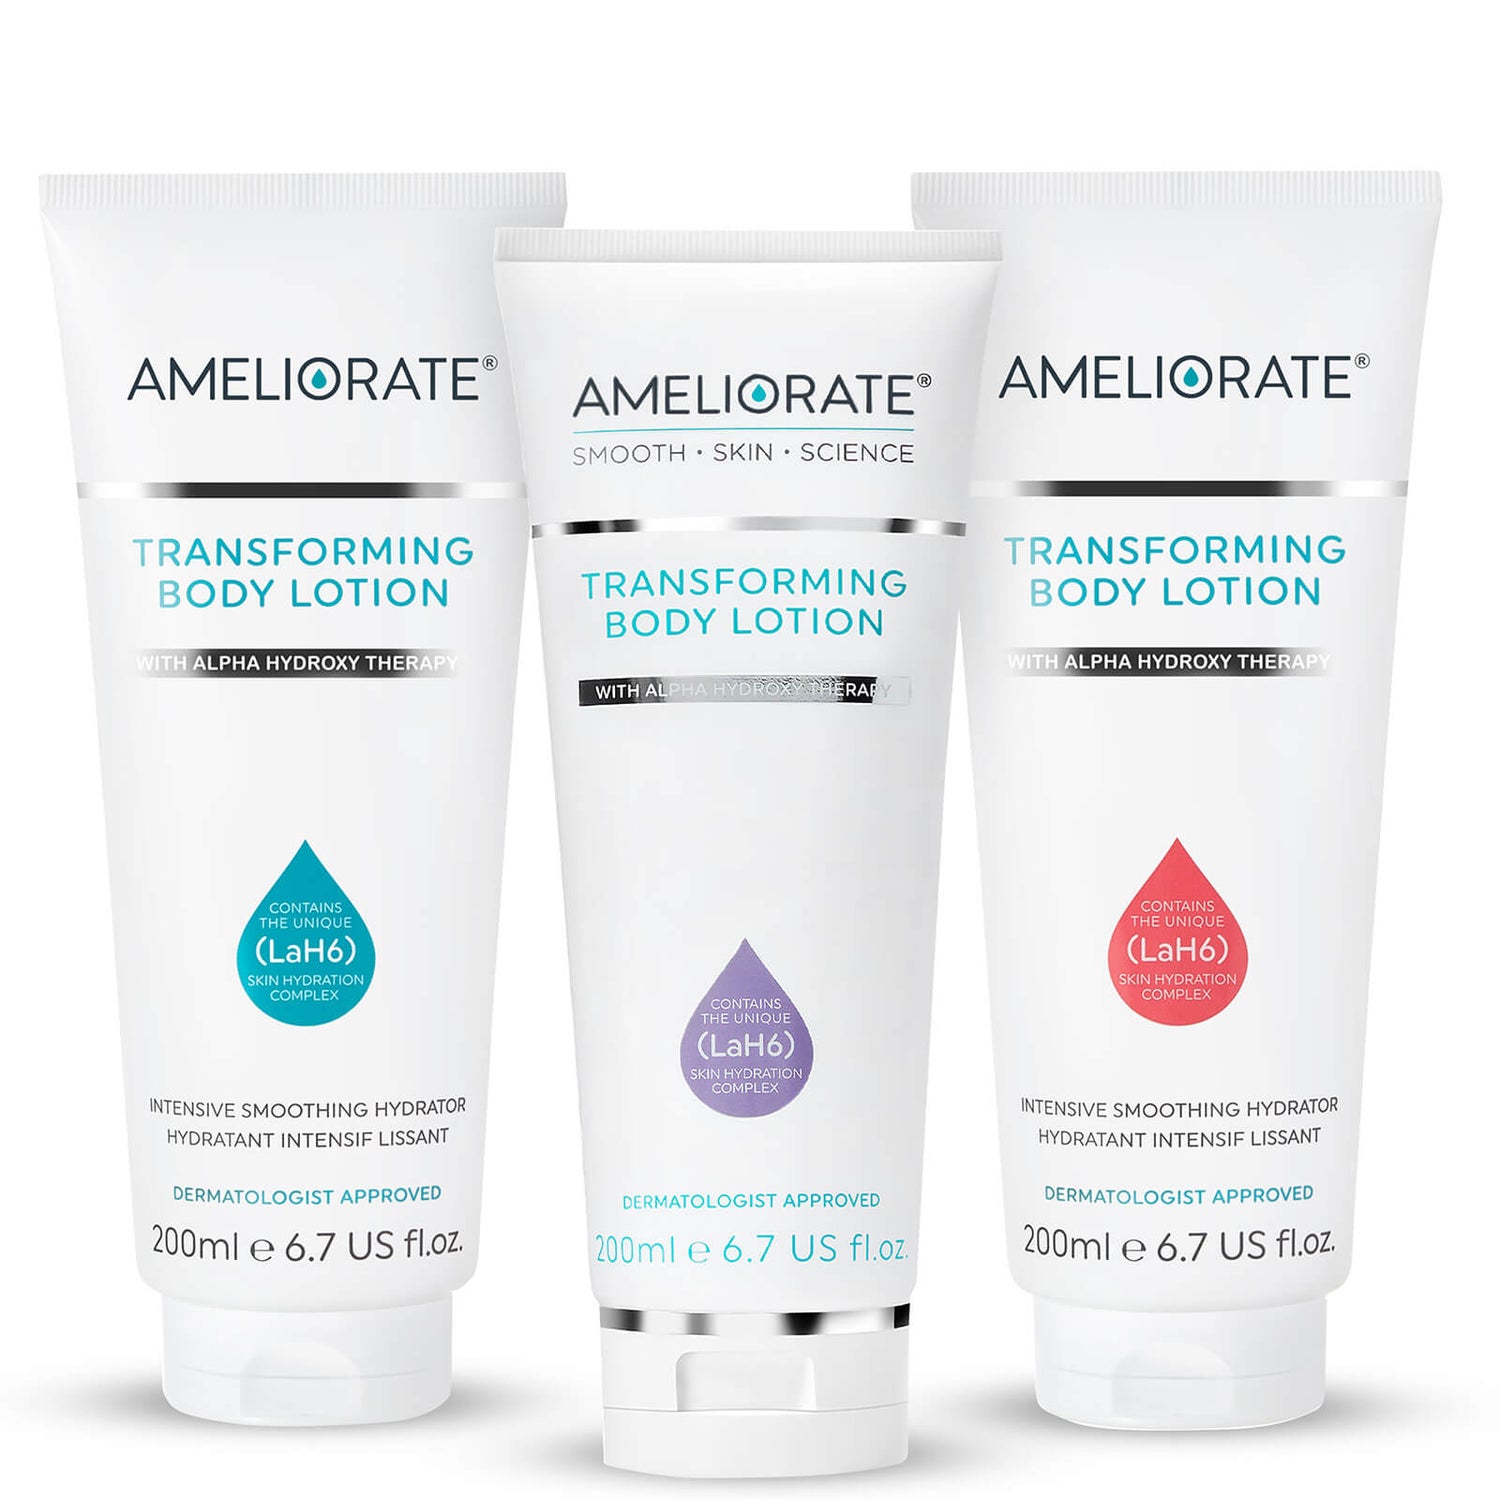 AMELIORATE Floral Transforming Body Lotion Trio (Worth £71.00)